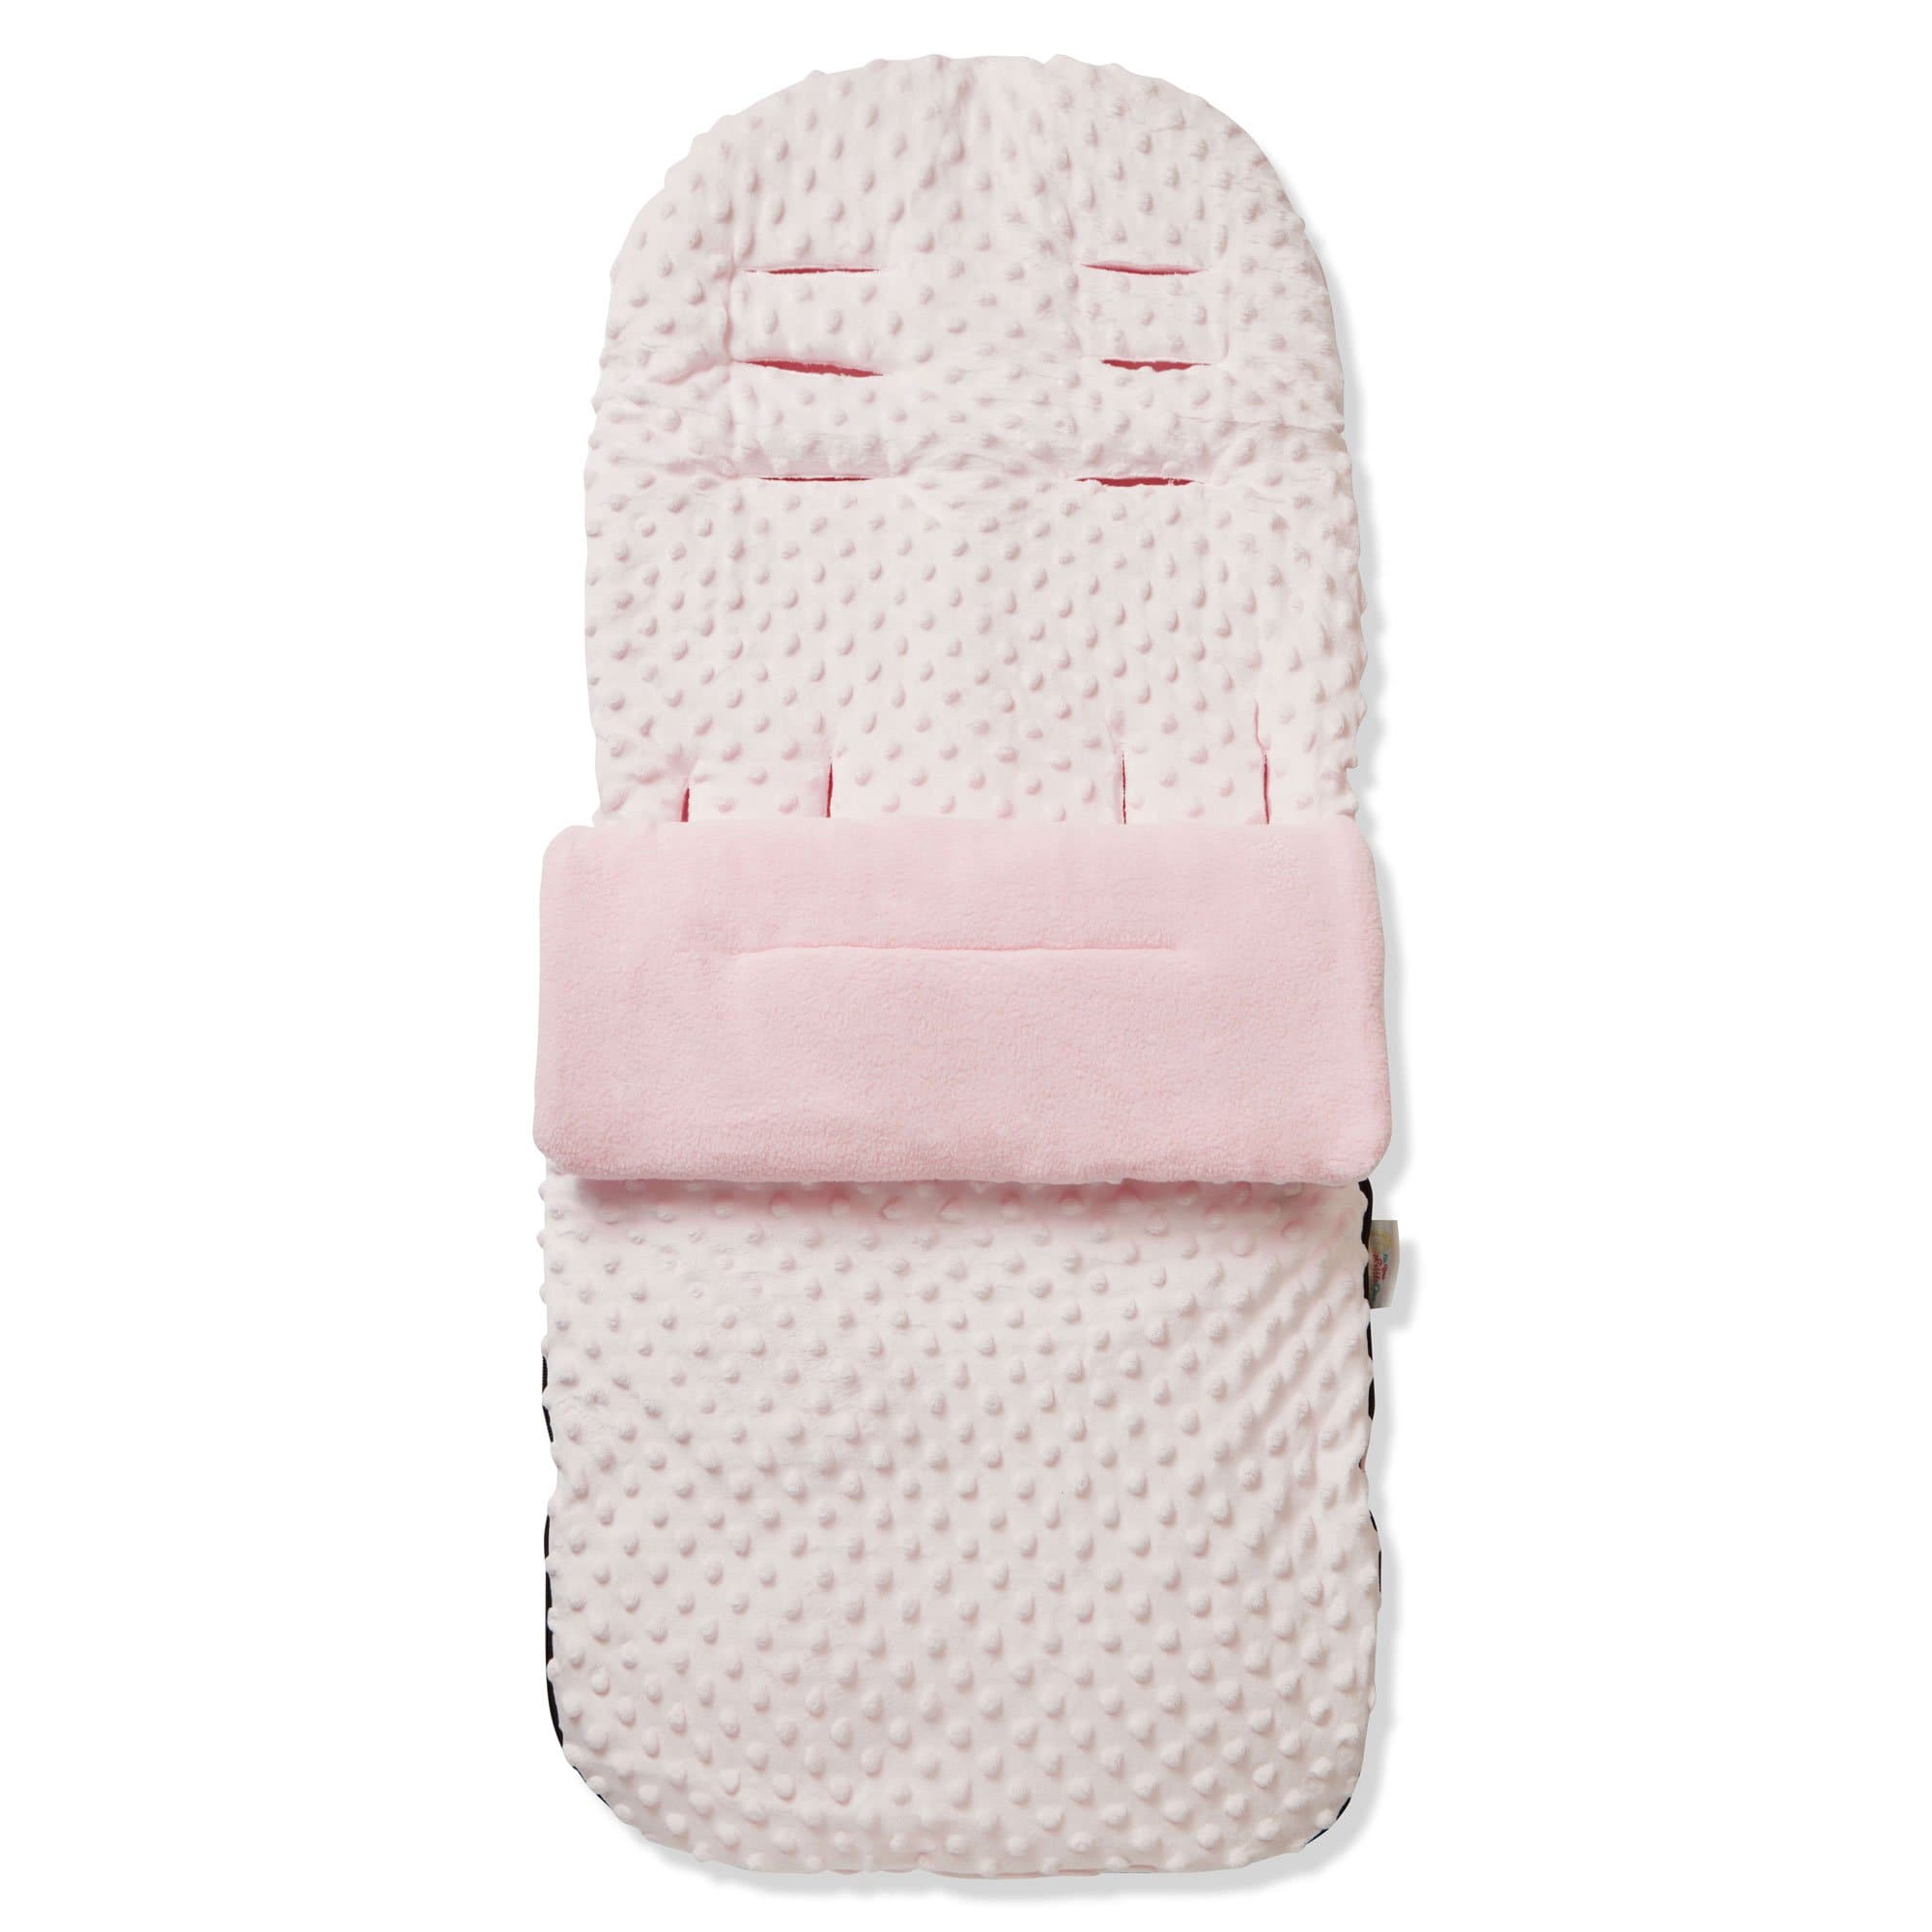 Dimple Footmuff / Cosy Toes Compatible with Baby Jogger - Pink / Fits All Models | For Your Little One